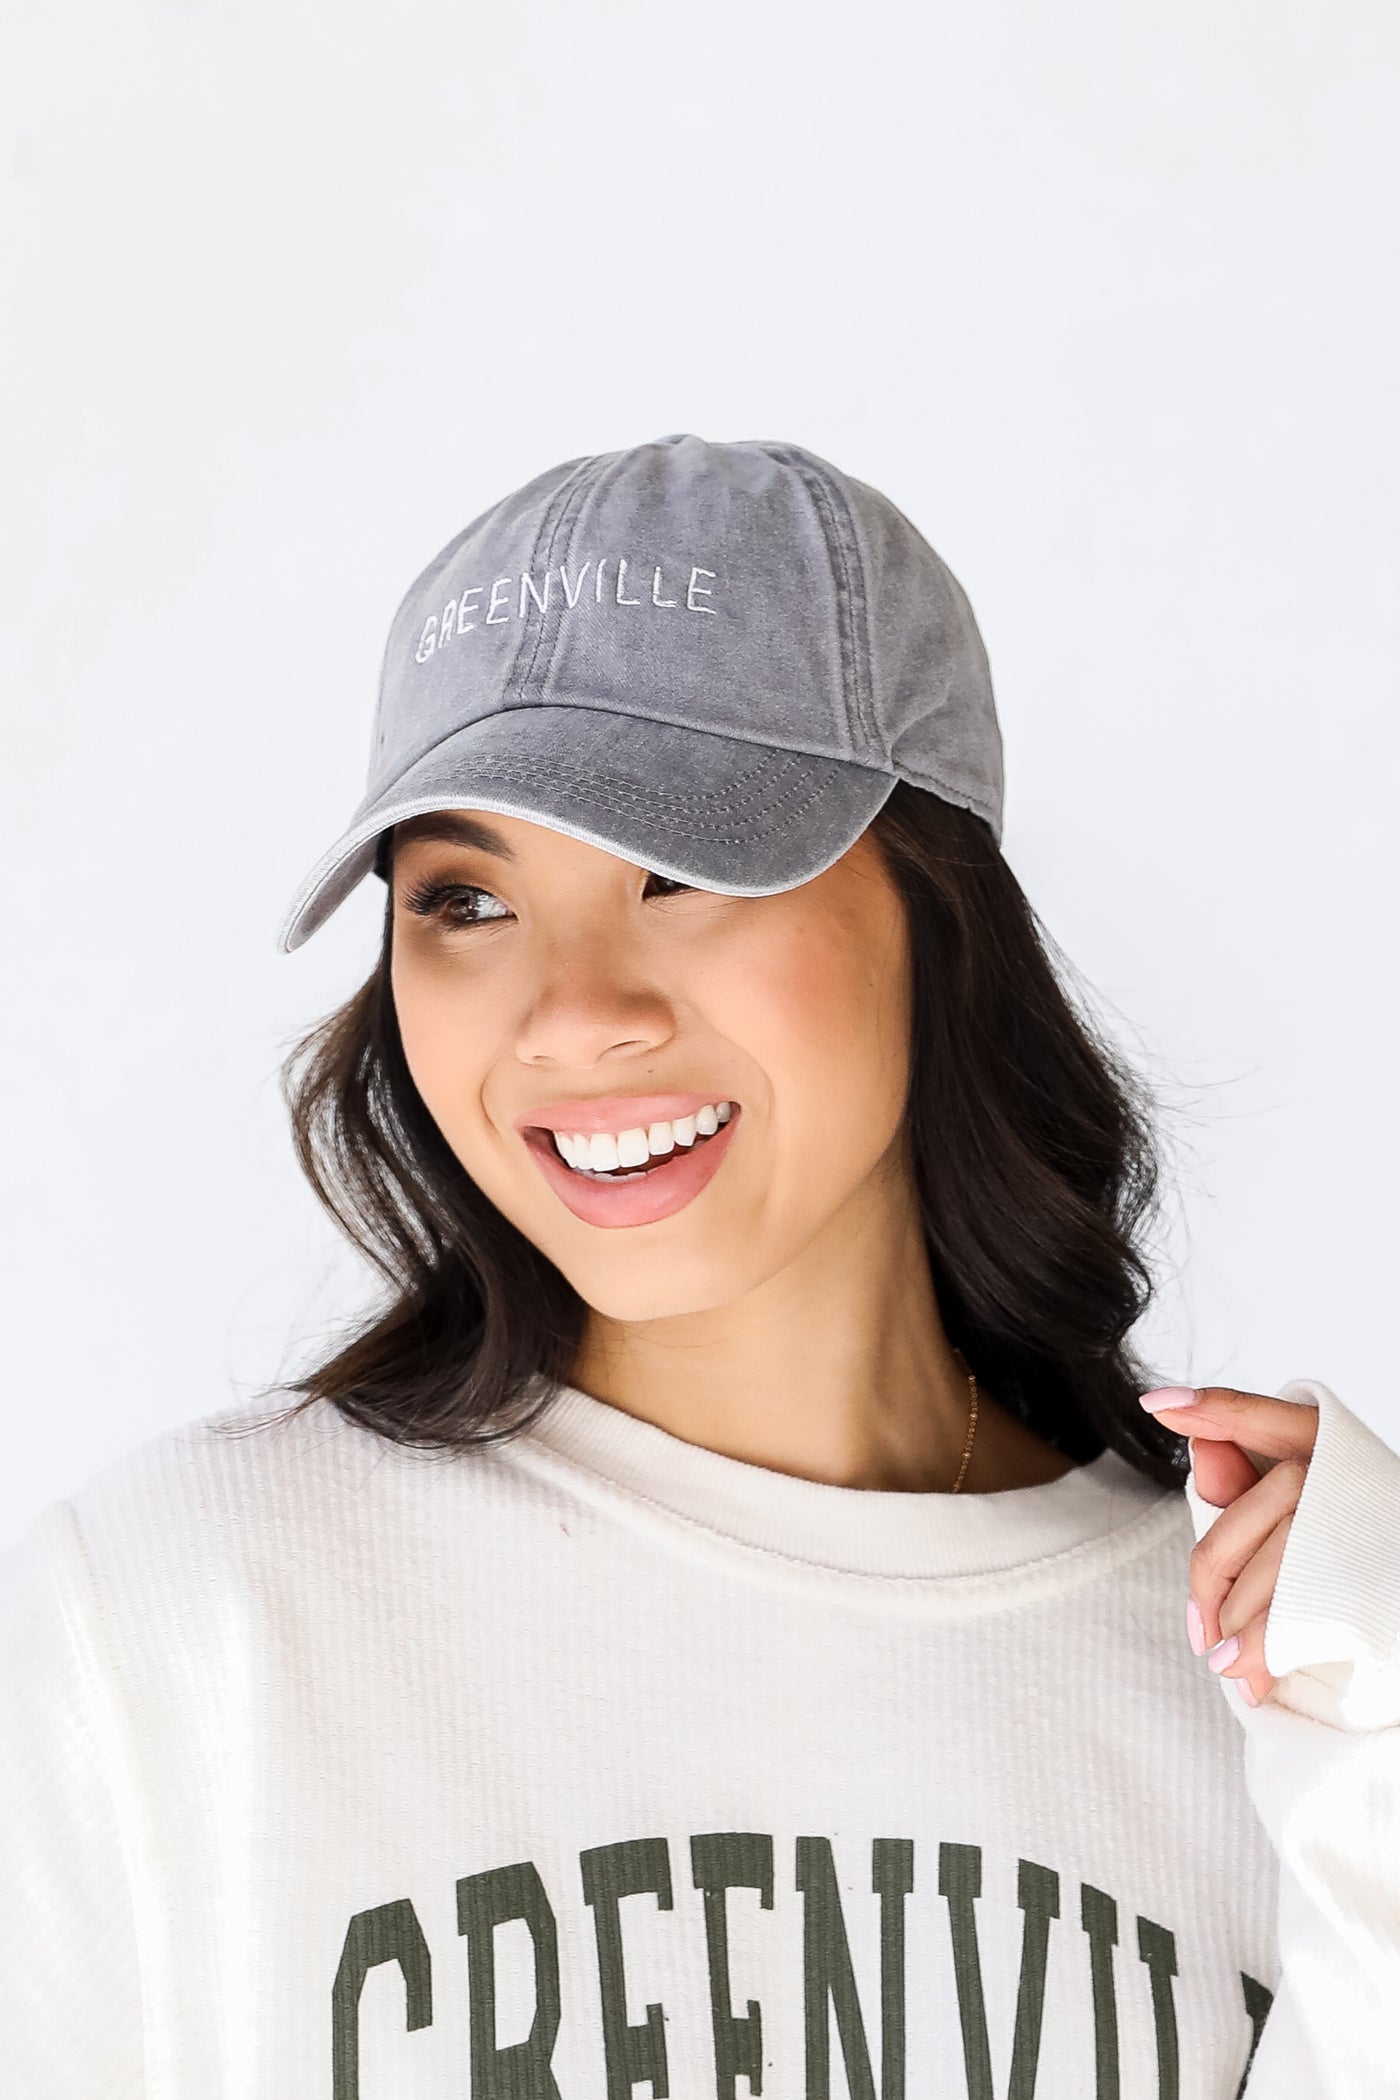 Greenville Embroidered Hat in grey